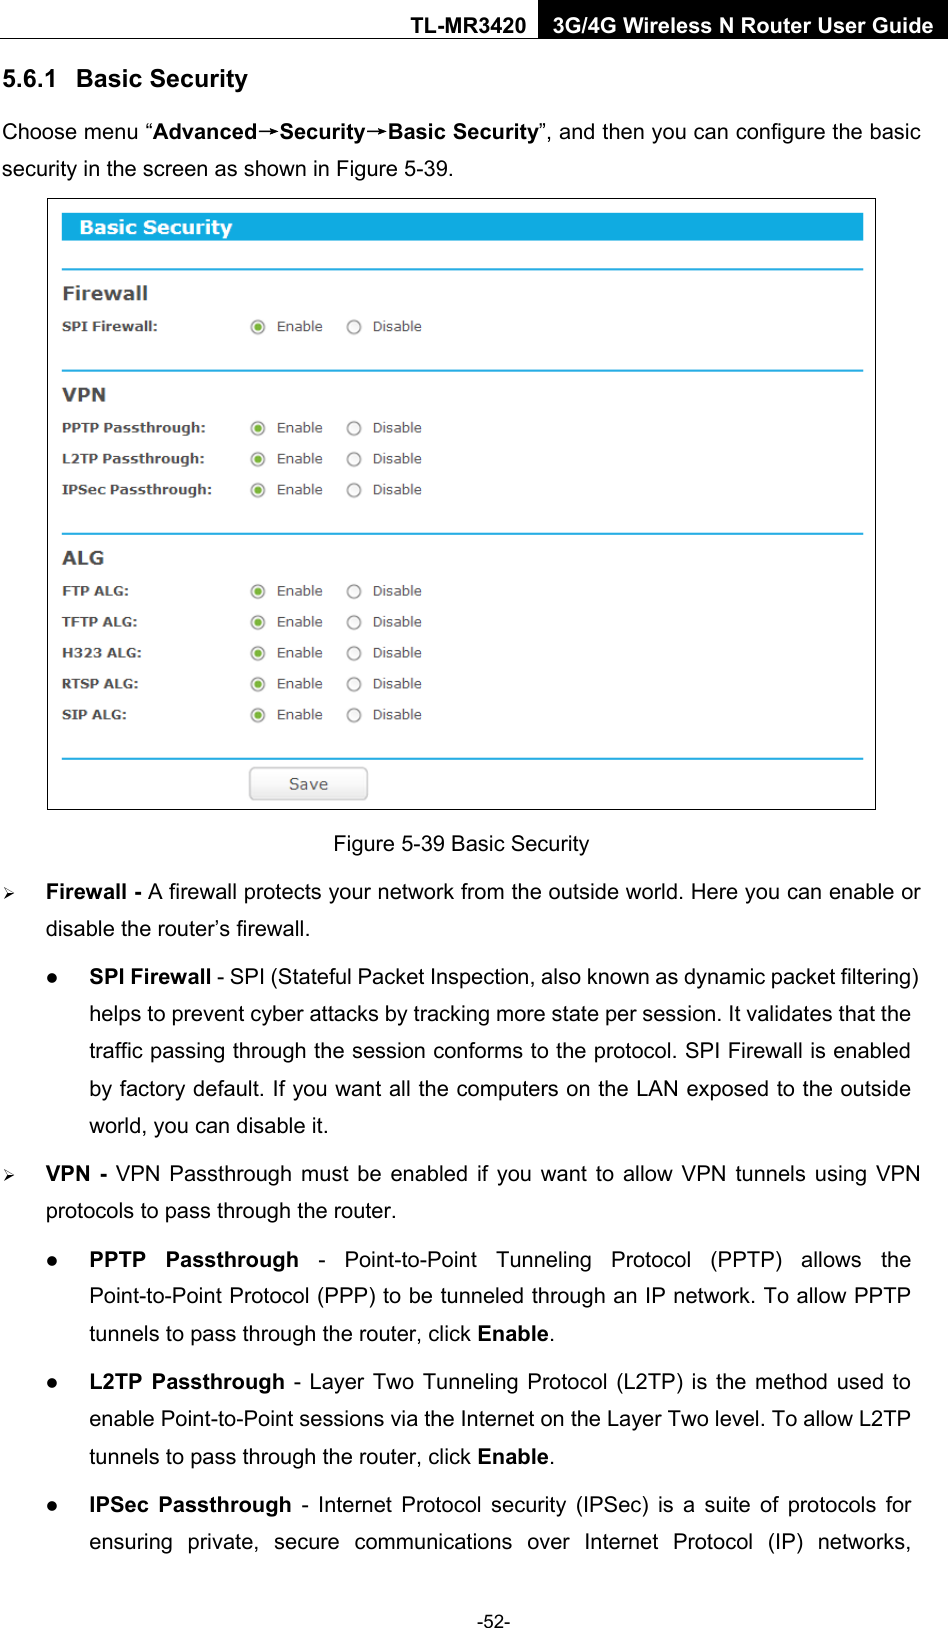    -52- TL-MR3420 3G/4G Wireless N Router User Guide 5.6.1 Basic Security Choose menu “Advanced→Security→Basic Security”, and then you can configure the basic security in the screen as shown in Figure 5-39.  Figure 5-39 Basic Security  Firewall - A firewall protects your network from the outside world. Here you can enable or disable the router’s firewall.  SPI Firewall - SPI (Stateful Packet Inspection, also known as dynamic packet filtering) helps to prevent cyber attacks by tracking more state per session. It validates that the traffic passing through the session conforms to the protocol. SPI Firewall is enabled by factory default. If you want all the computers on the LAN exposed to the outside world, you can disable it.    VPN  -  VPN Passthrough must be enabled if you want to allow VPN tunnels using VPN protocols to pass through the router.  PPTP Passthrough  -  Point-to-Point Tunneling Protocol (PPTP) allows the Point-to-Point Protocol (PPP) to be tunneled through an IP network. To allow PPTP tunnels to pass through the router, click Enable.  L2TP Passthrough - Layer Two Tunneling Protocol (L2TP) is the method used to enable Point-to-Point sessions via the Internet on the Layer Two level. To allow L2TP tunnels to pass through the router, click Enable.  IPSec Passthrough - Internet Protocol security (IPSec) is a suite of protocols for ensuring private, secure communications over Internet Protocol (IP) networks, 